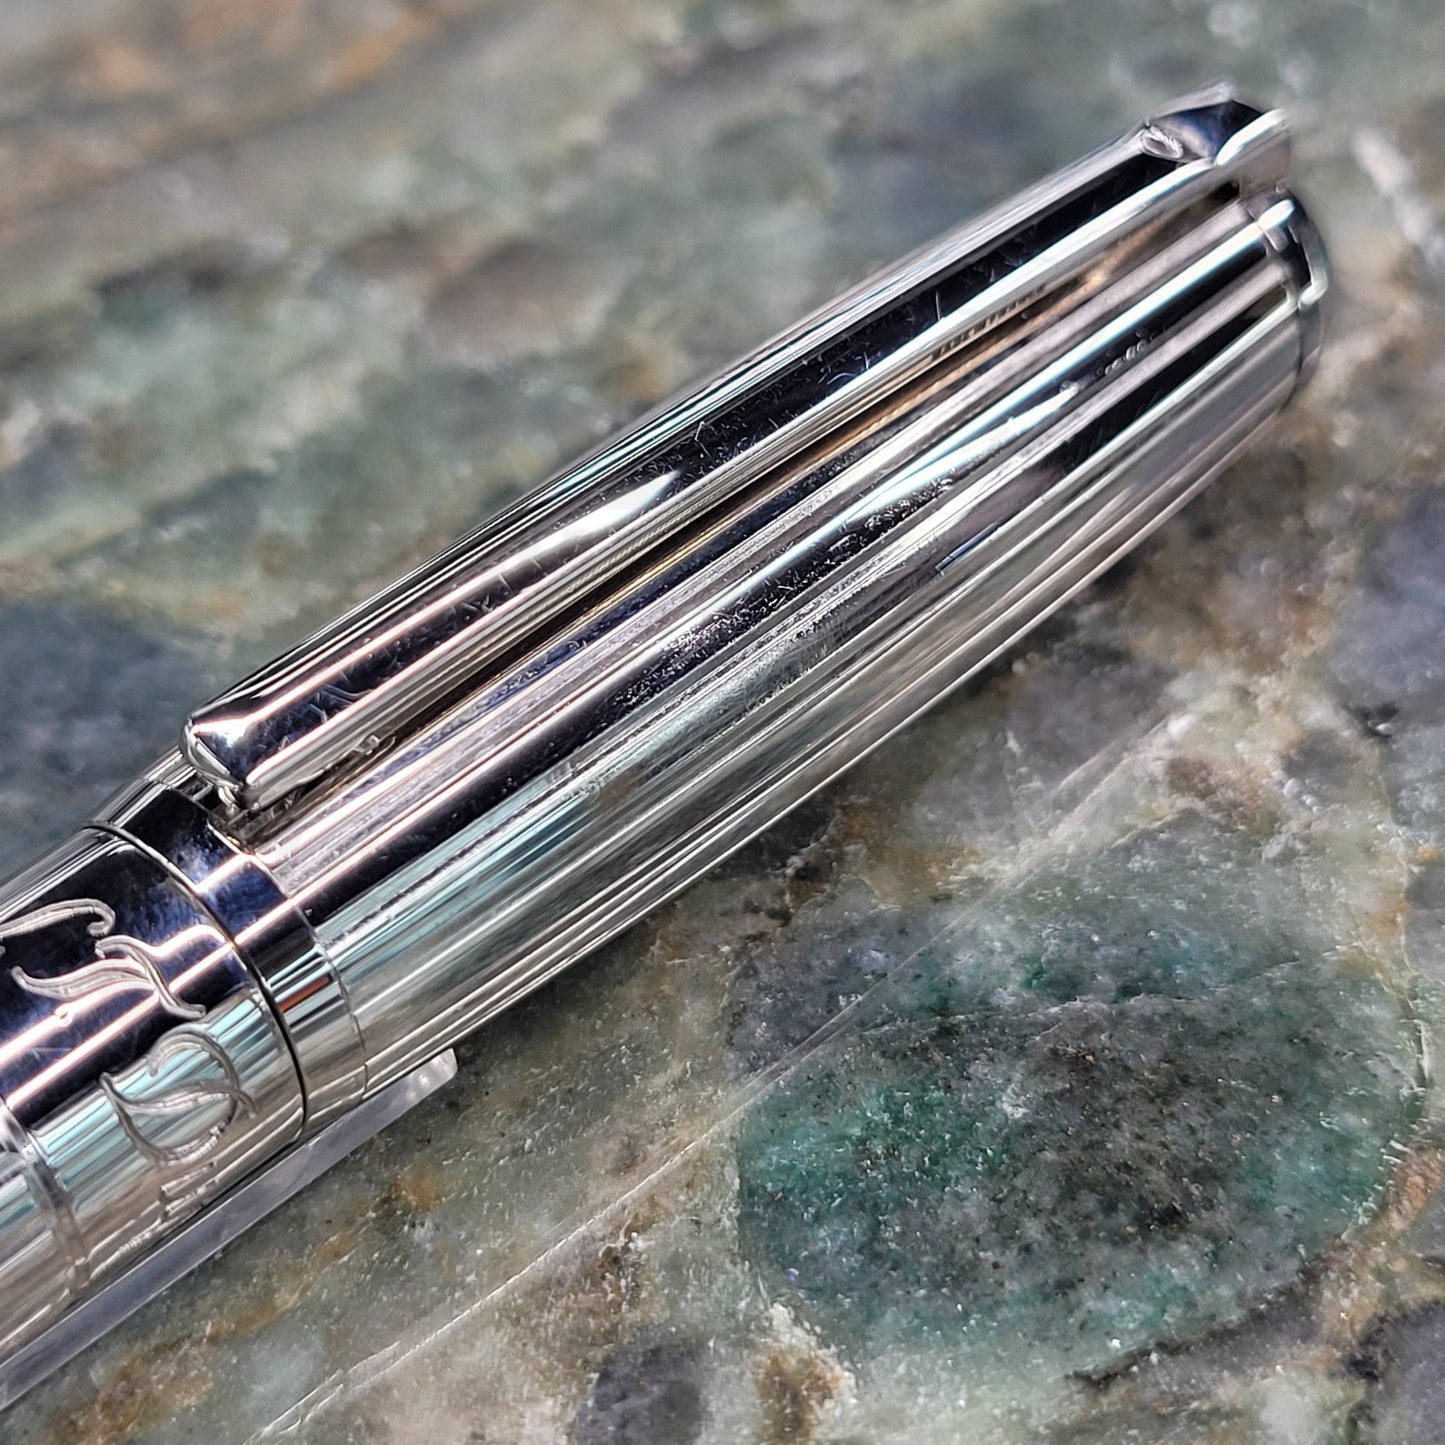 Preowned S.T. Dupont Elysee Goldsmith Palladium Vertical Lines Ballpoint Pen, 415600